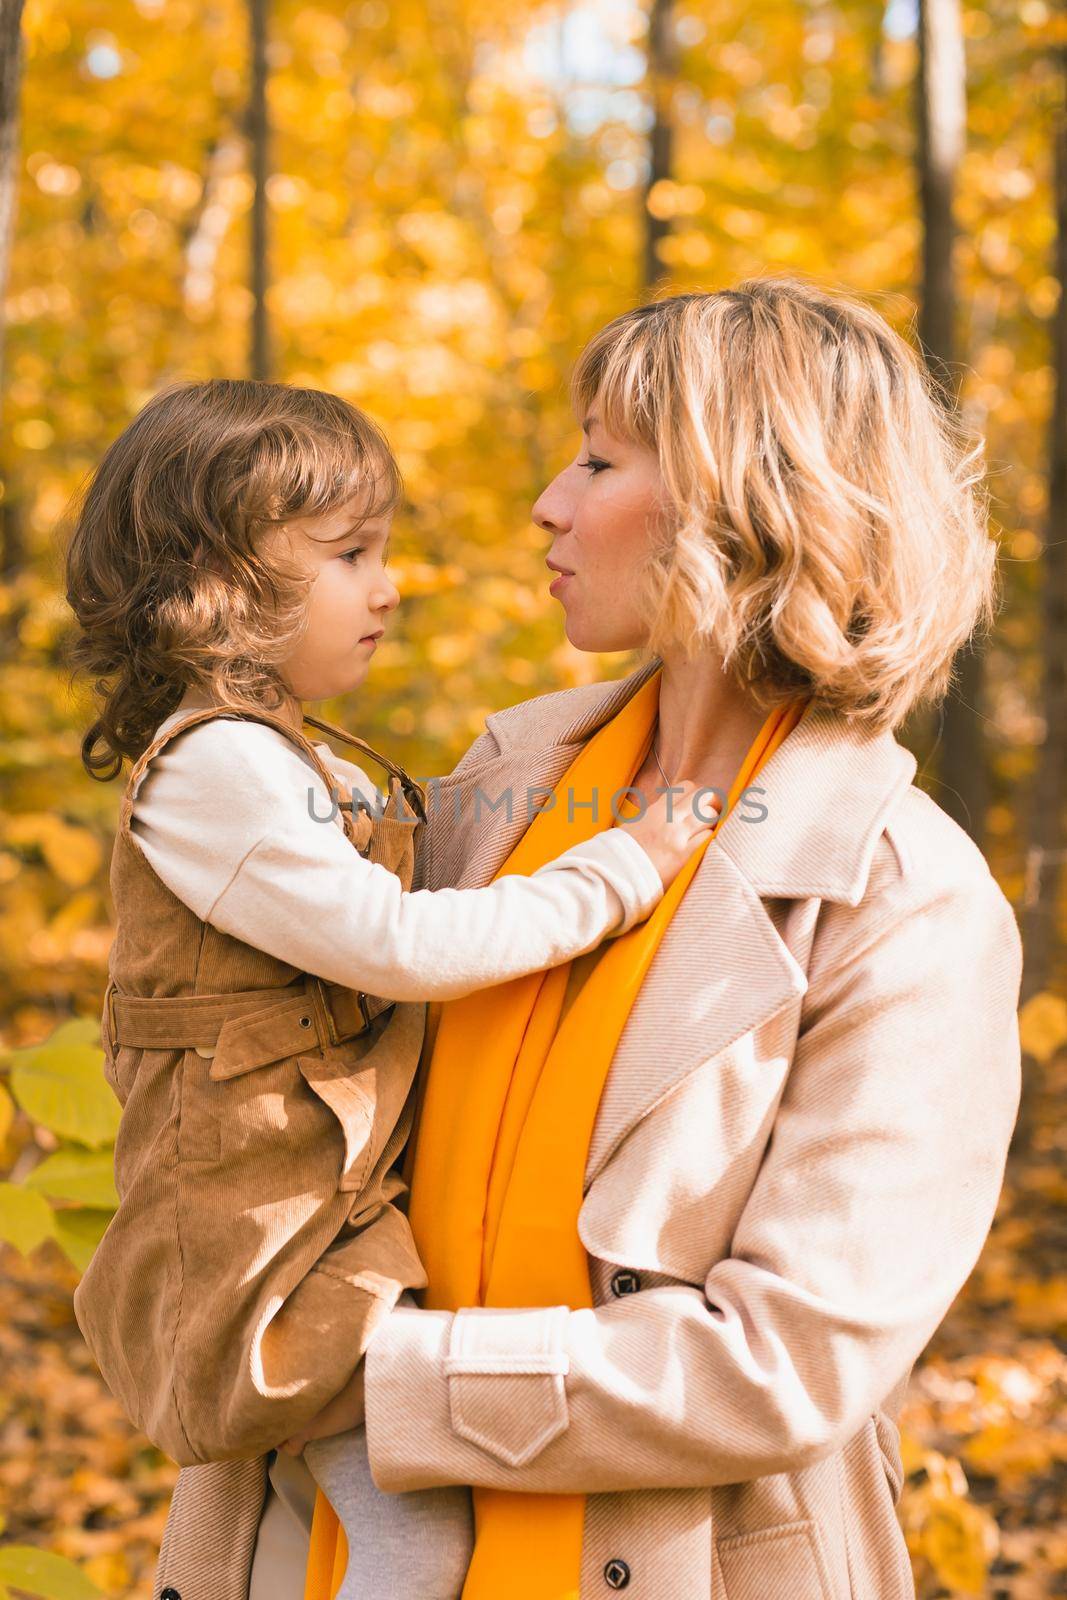 Woman with kid girl outdoors in fall. Child kissing mom. Mothers day holiday and autumn concept